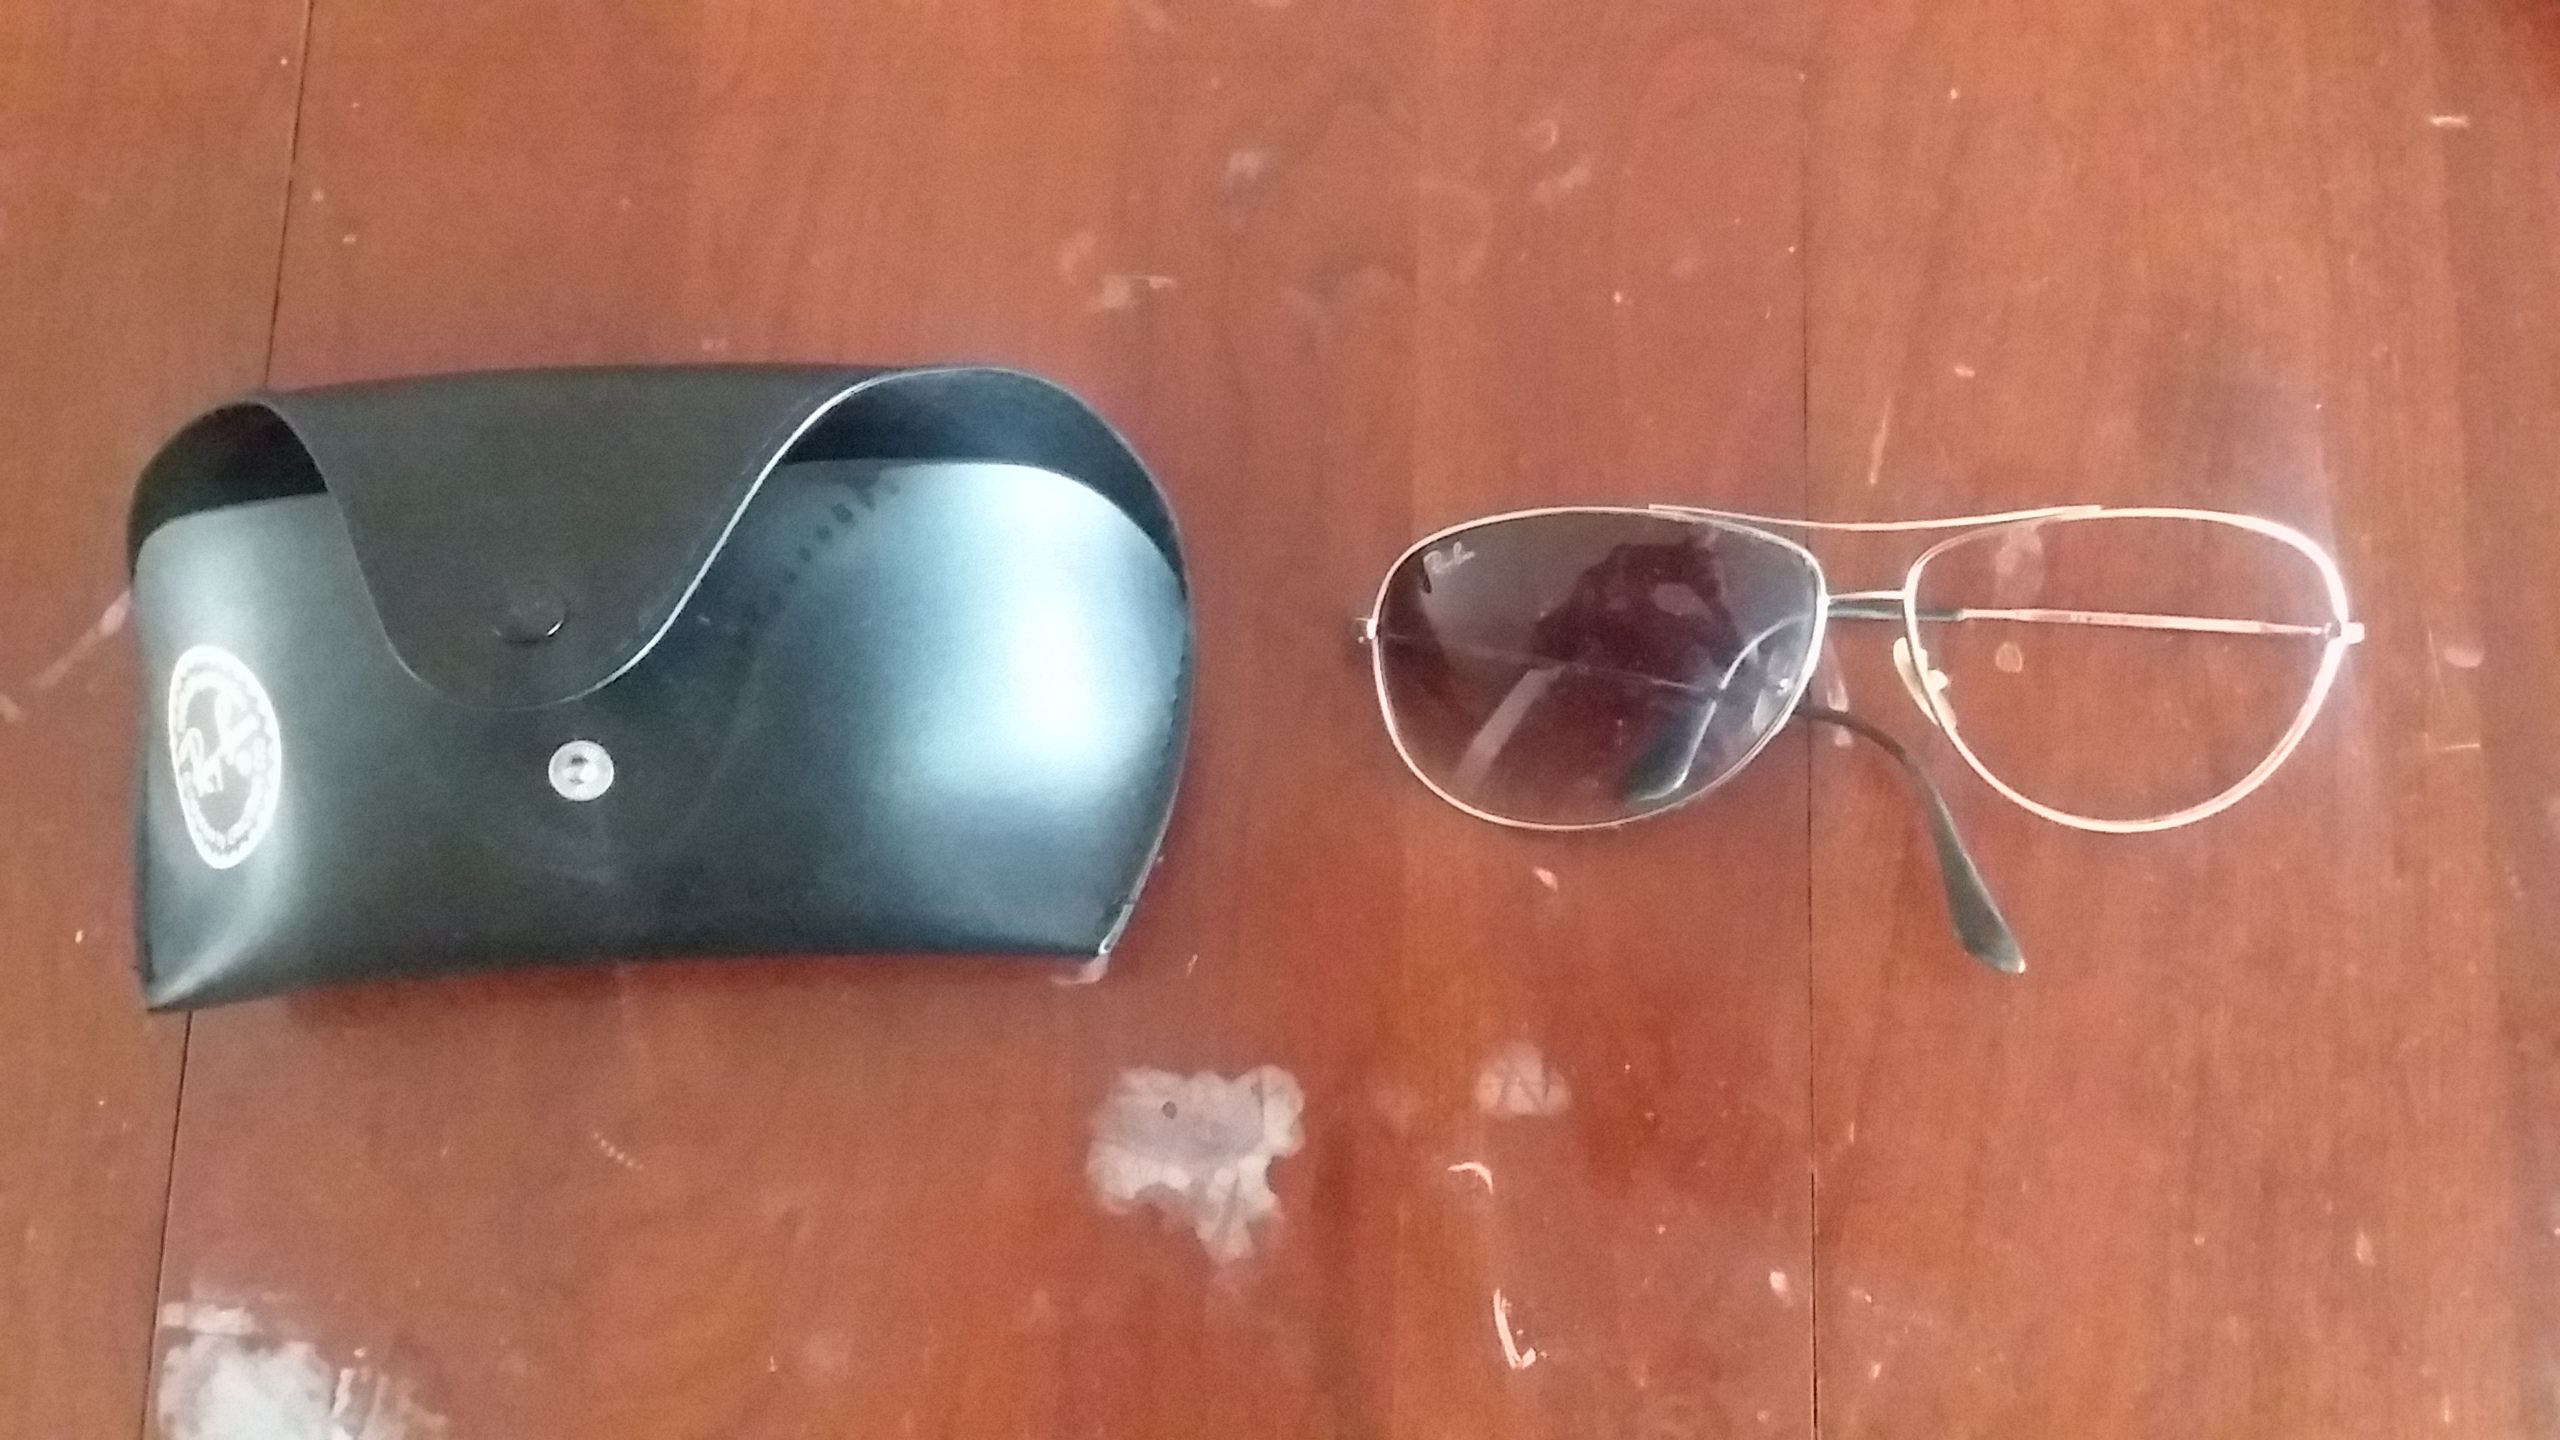 Ray Ban Sunglasses - missing one lens these were bought at nordstroms